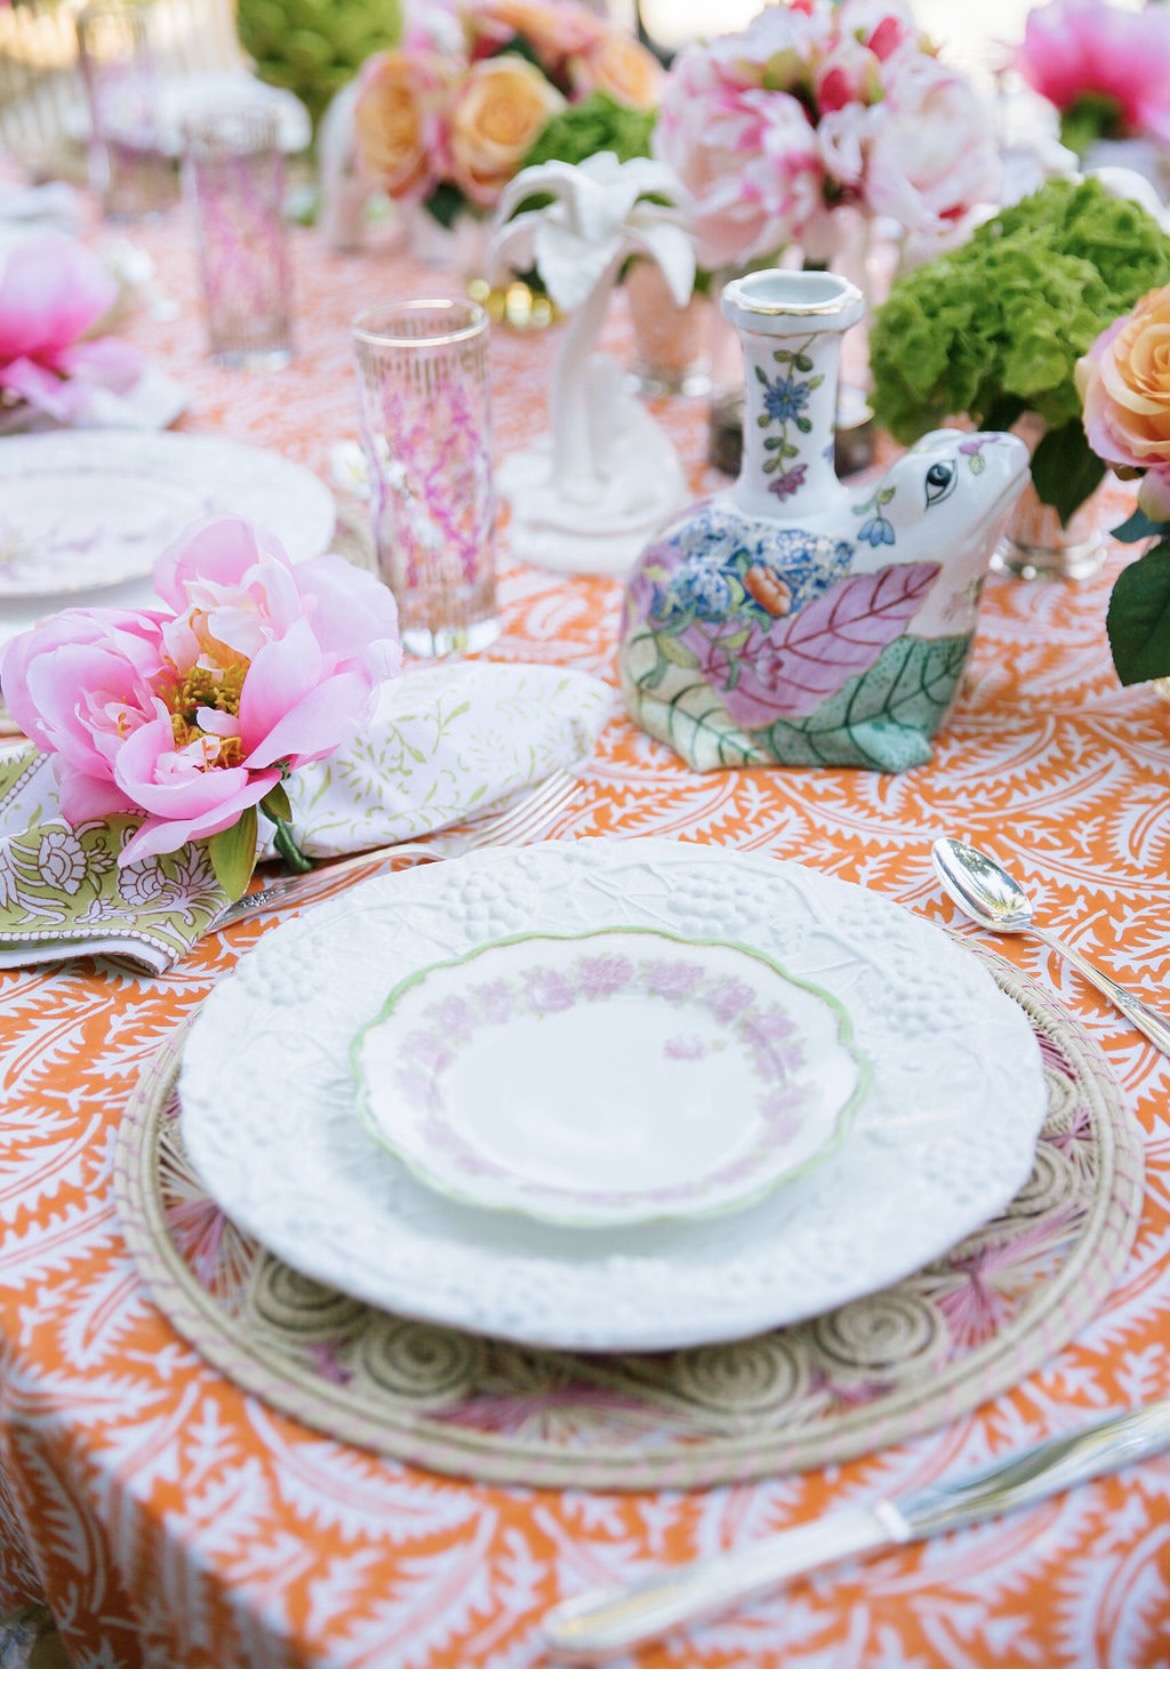 The Marrakech in Orange Creamsicle Tablecloth